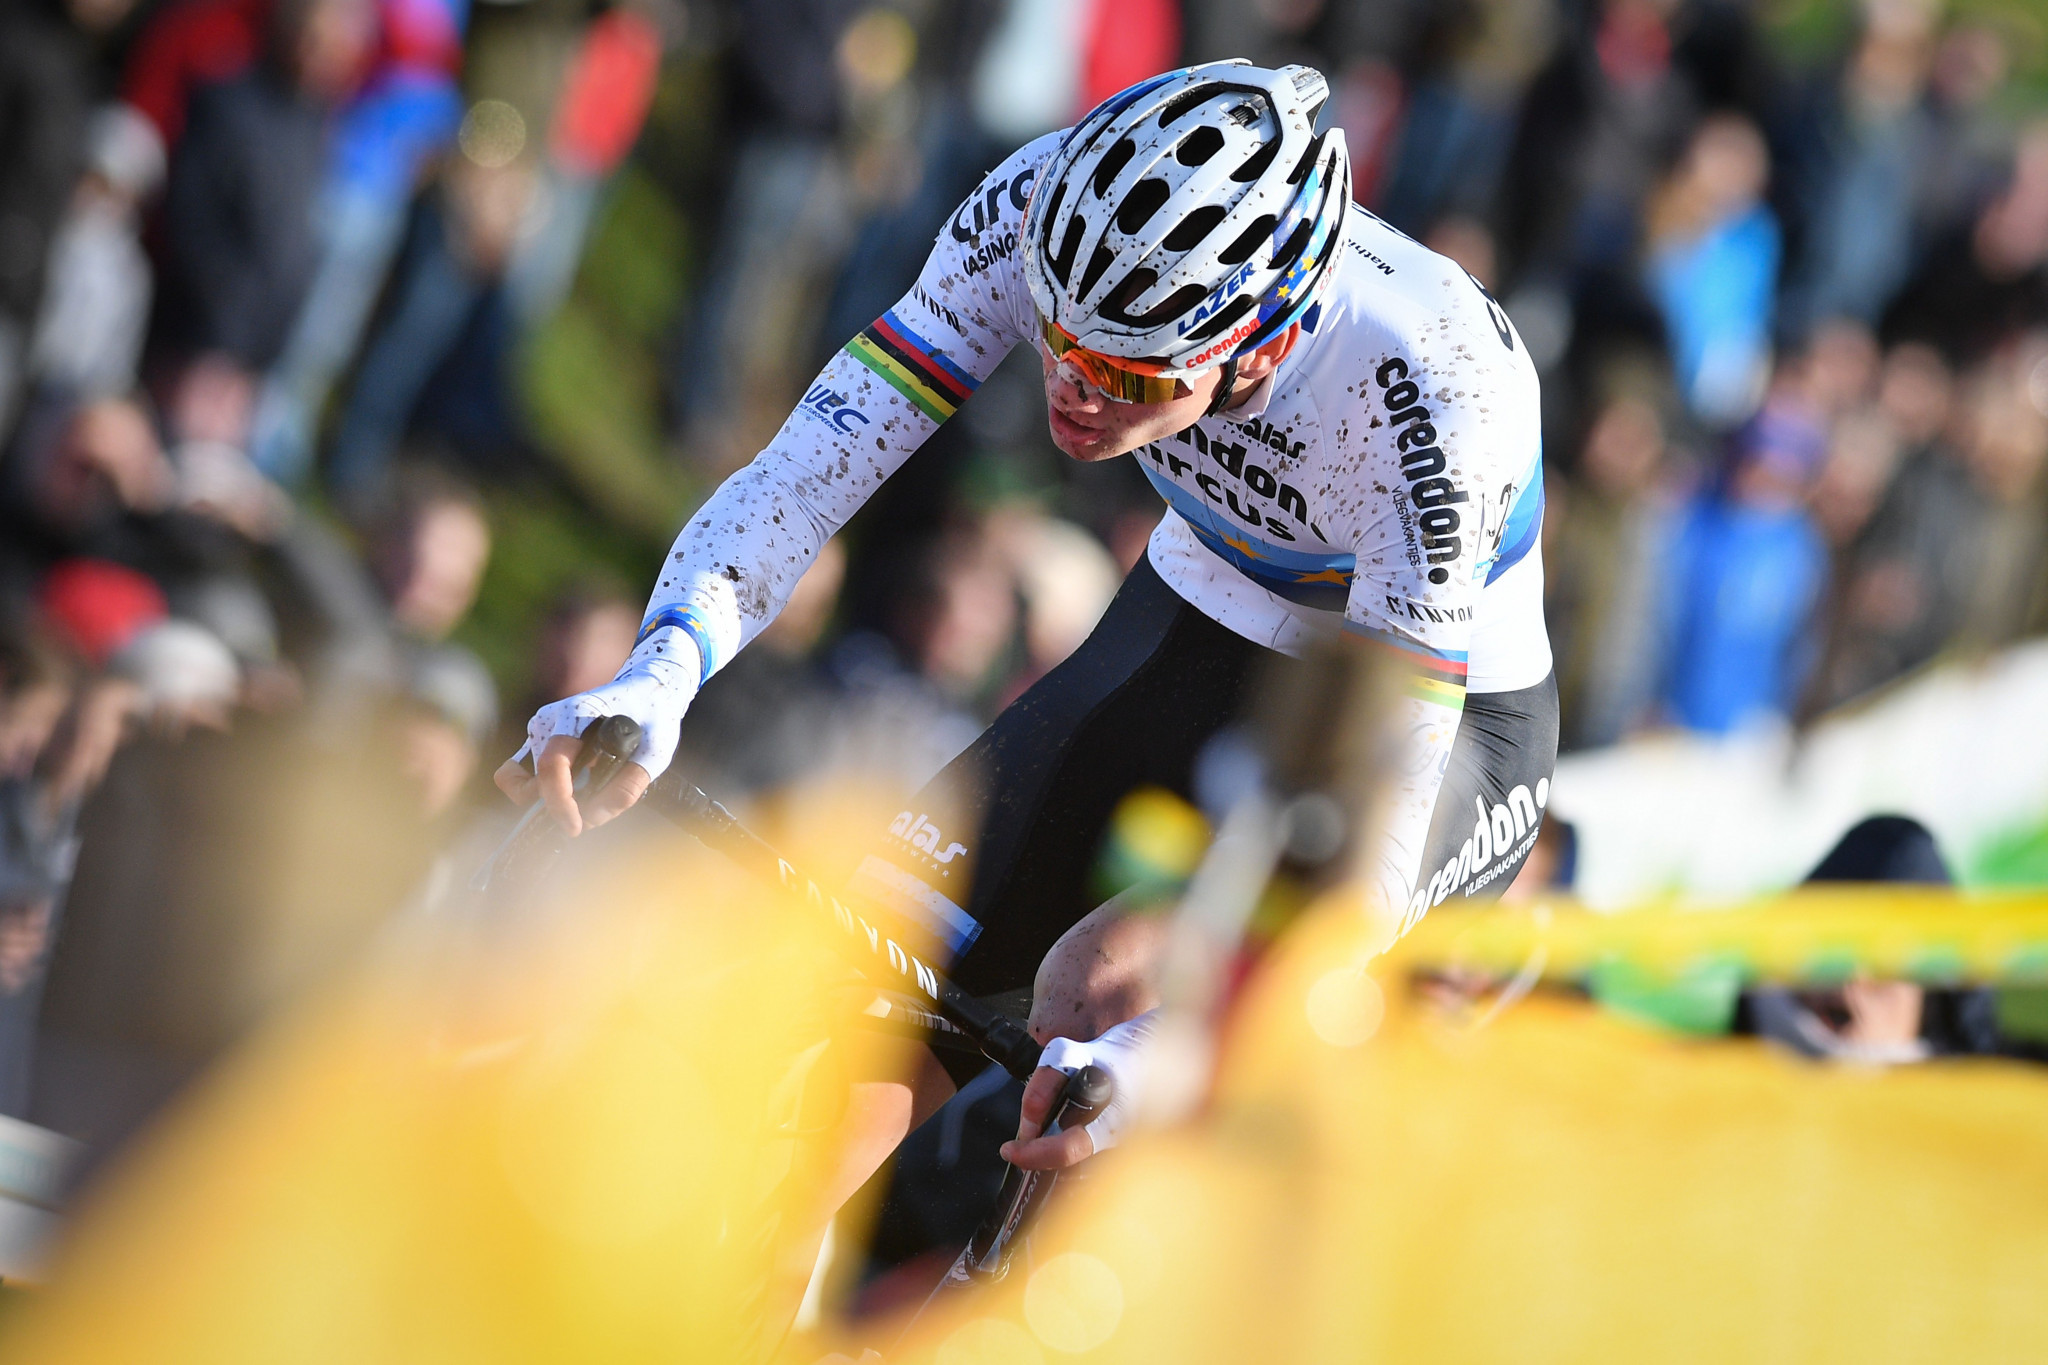 Tabor to hold fourth event of UCI Cyclo-Cross World Cup season